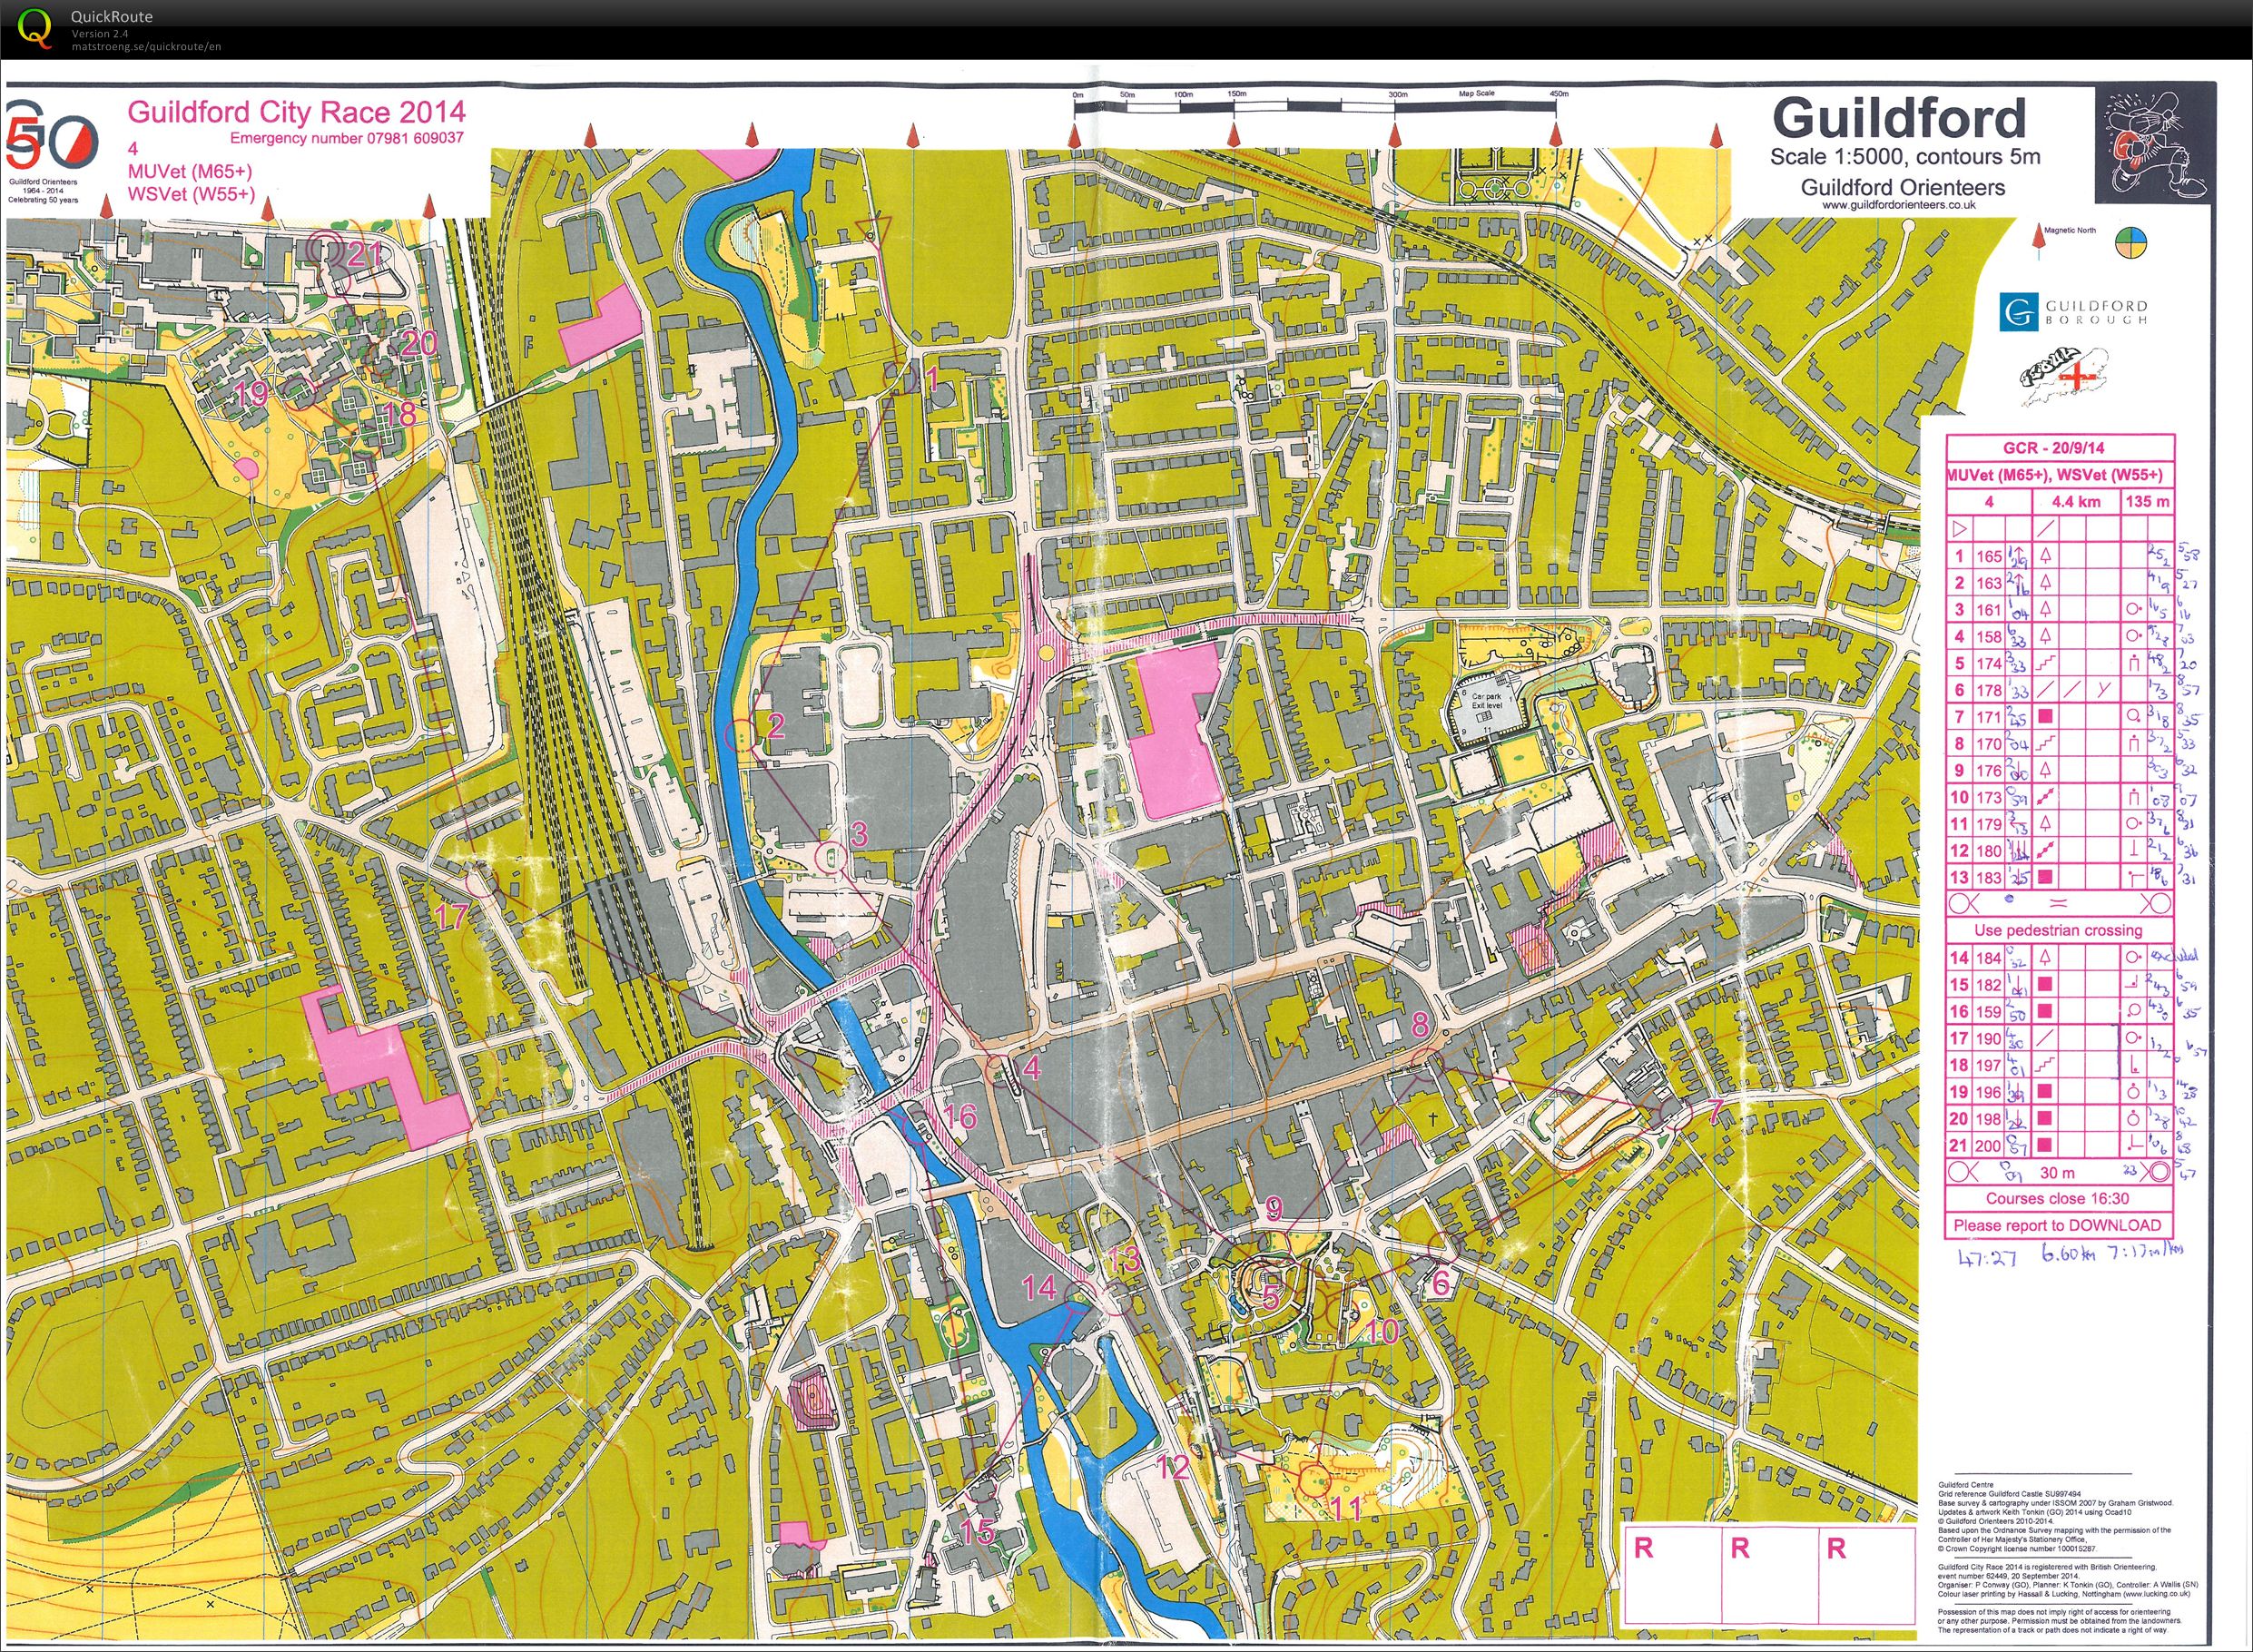 Guildford Urban Race (20/09/2014)